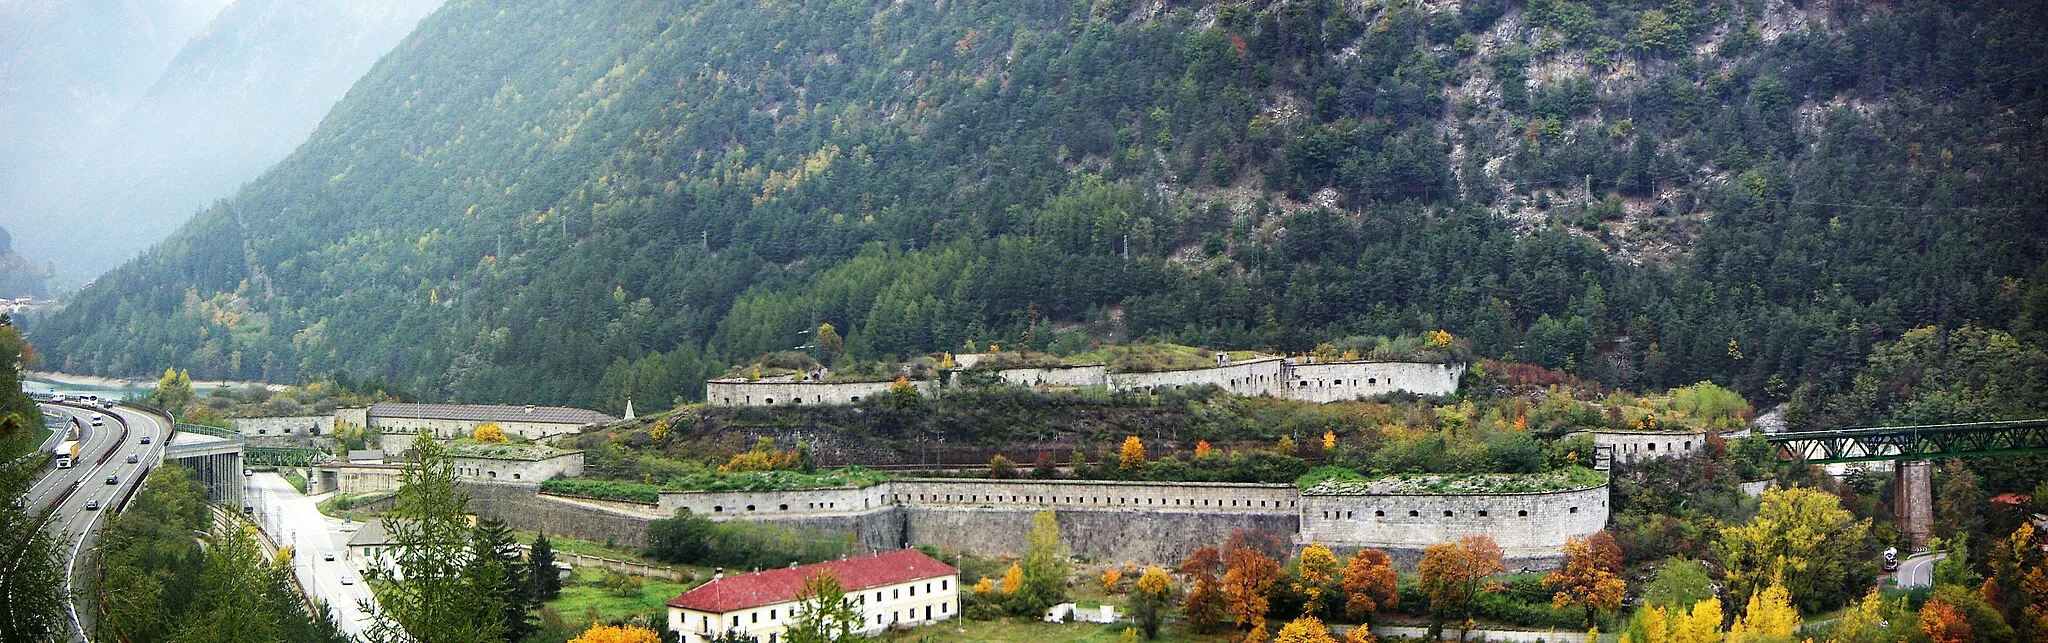 Photo showing: Fortress of Franzensfeste (Fortezza) in South Tyrol, Italy